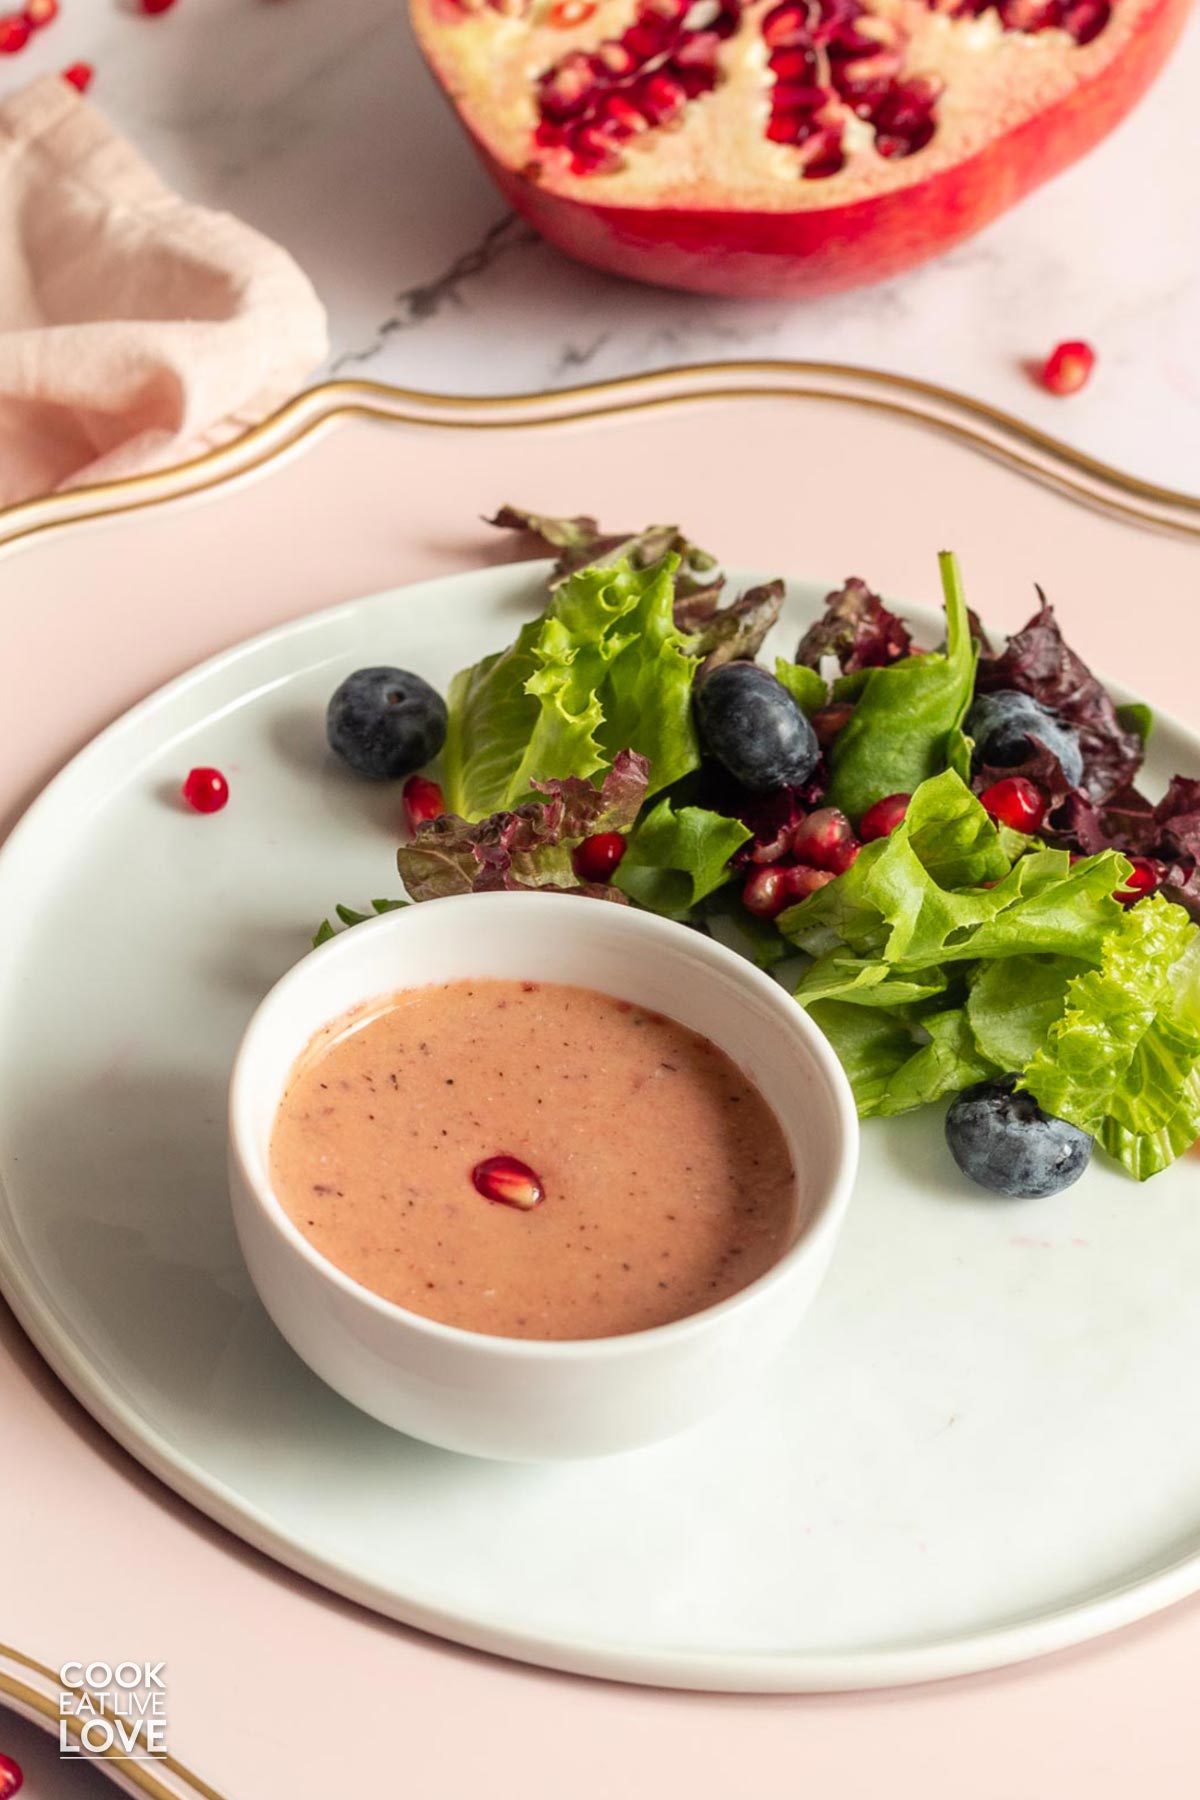 Pomegranate dressing in a little bowl on a plate with some salad.